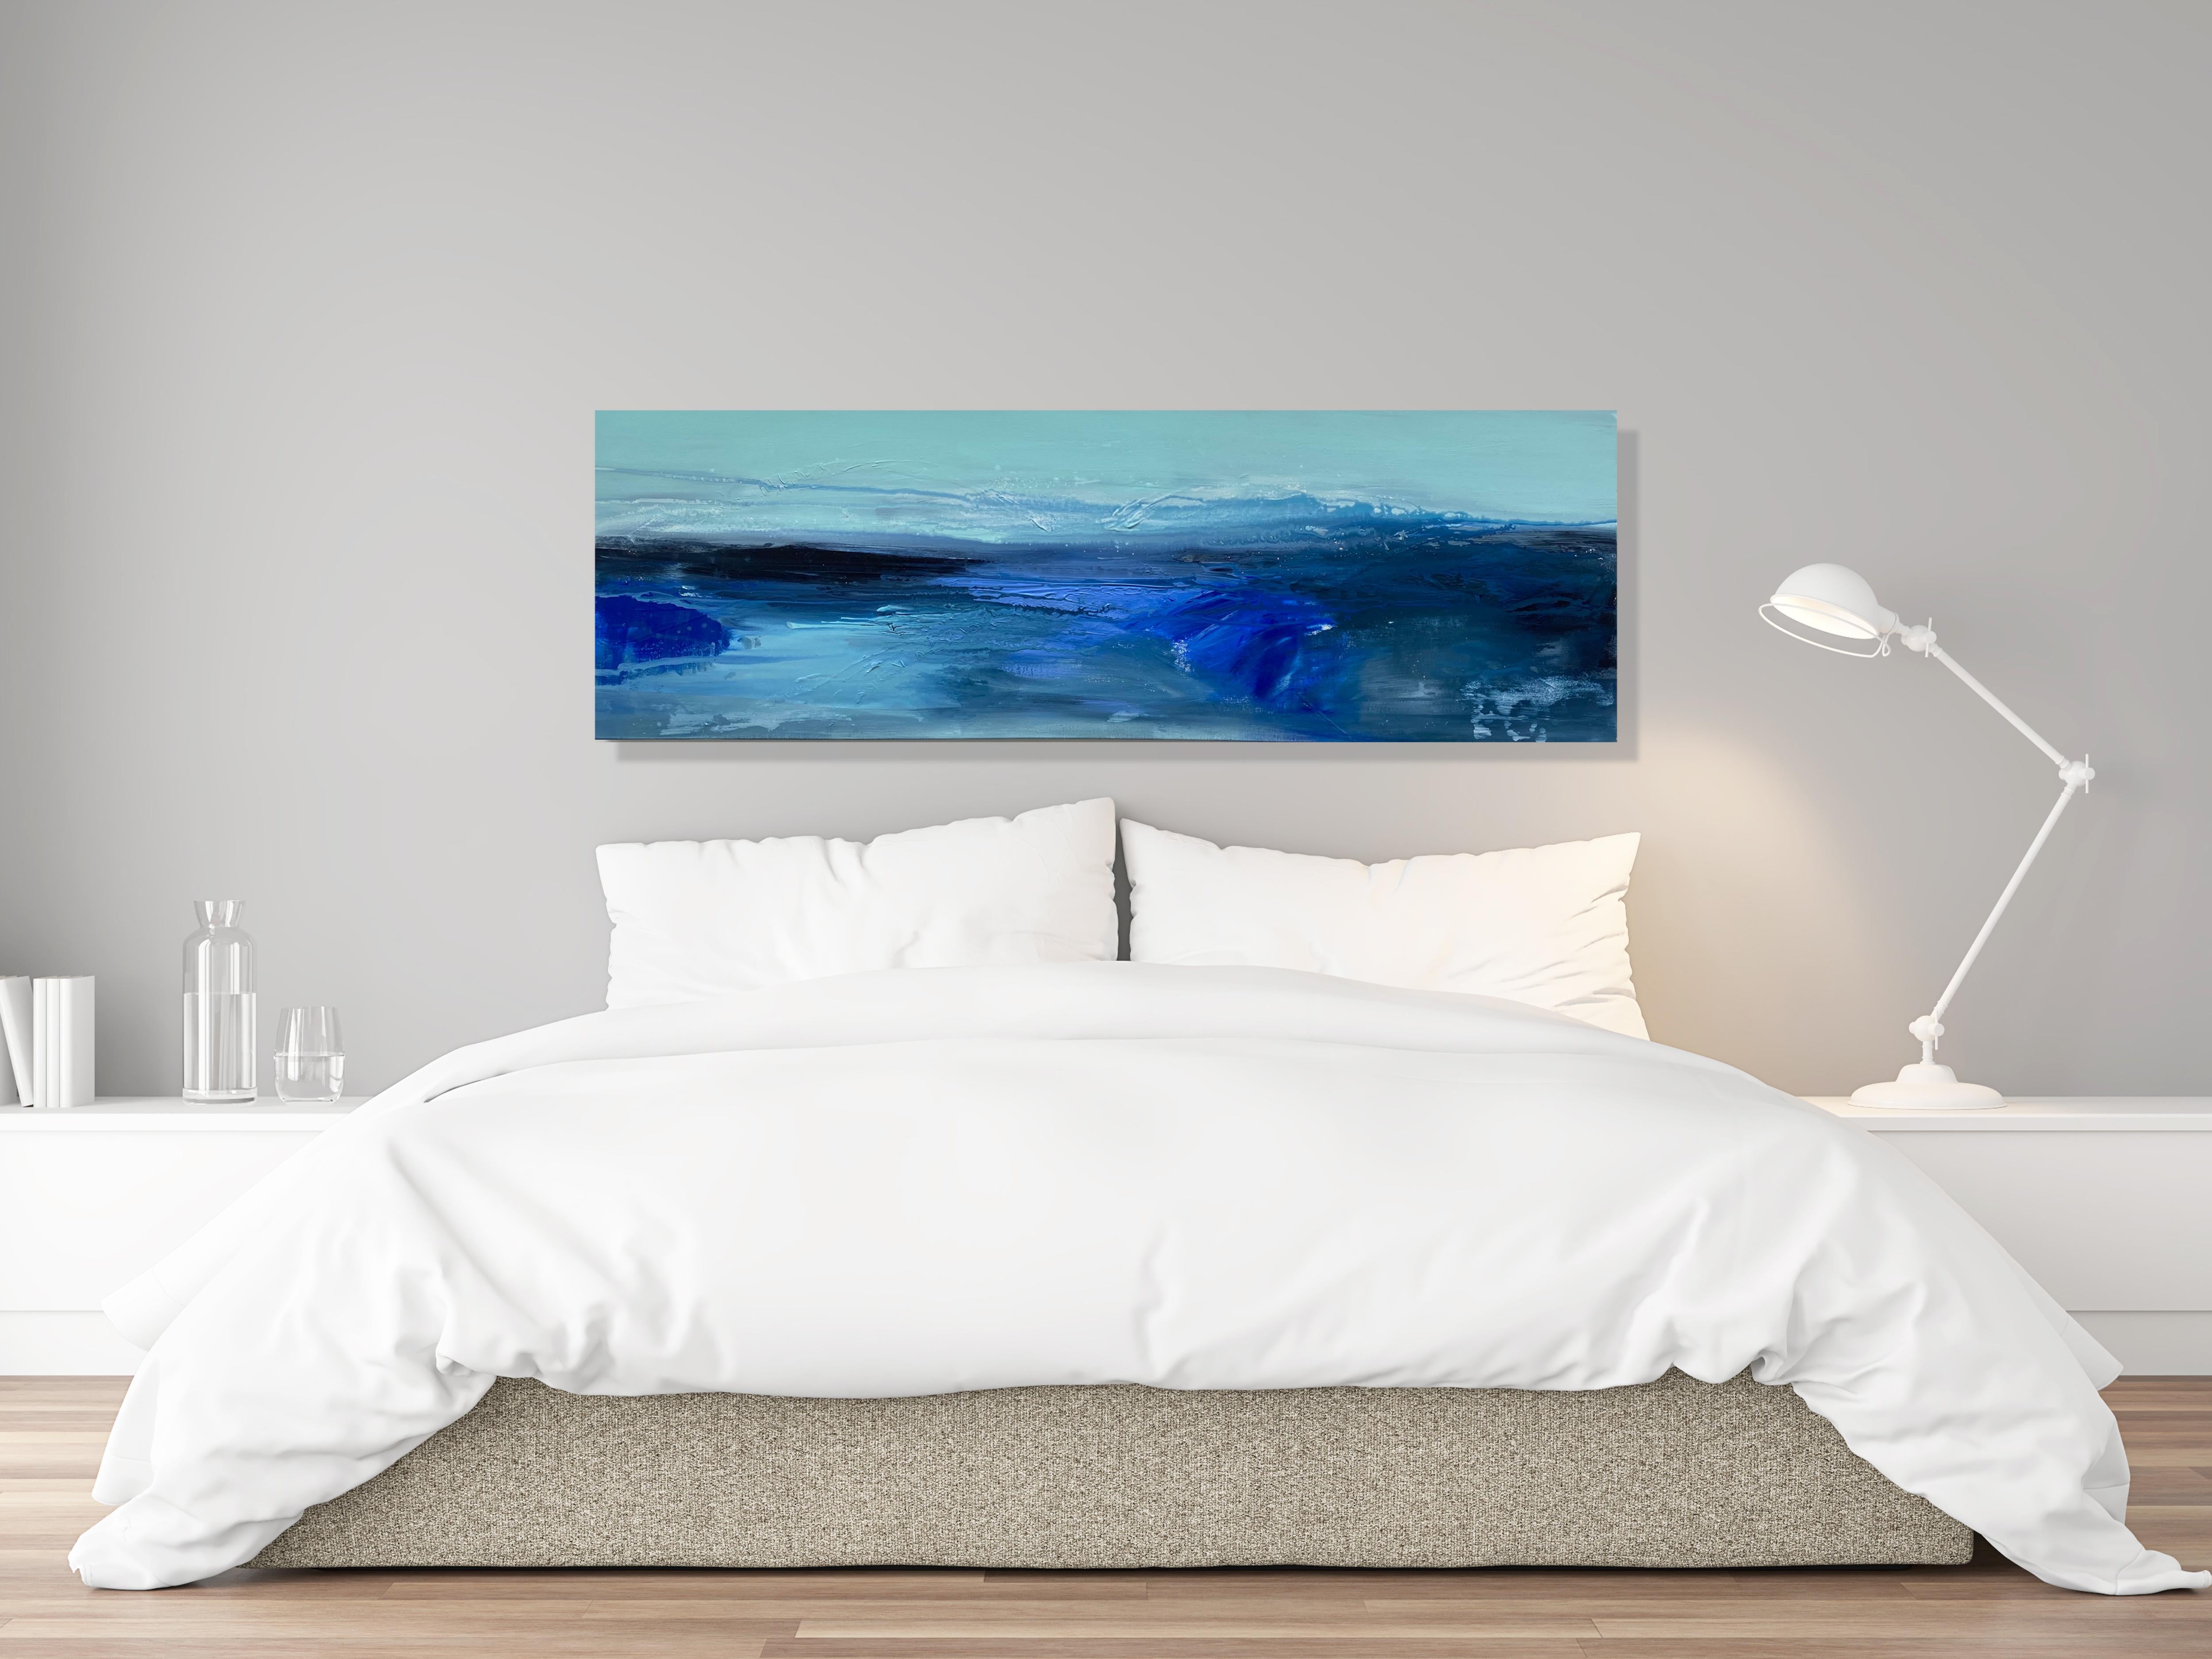 Blue ocean water abstract expressionist sea landscape sky  - Painting by Kathleen Rhee